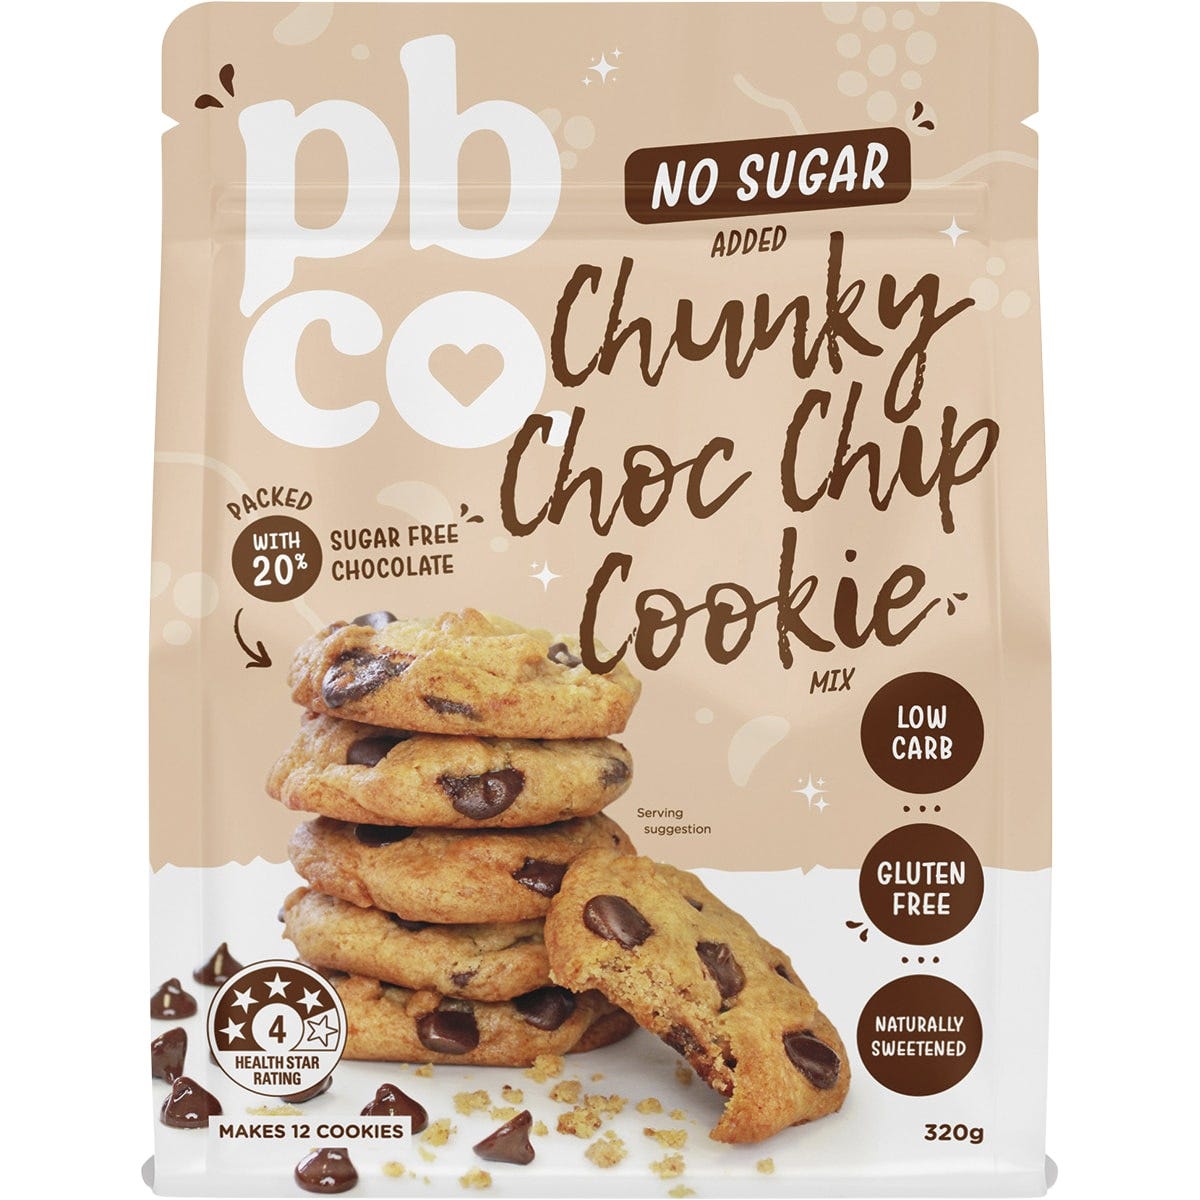 PBco Chunky Choc Chip Cookie Mix No Sugar Added 320g - Dr Earth - Baking